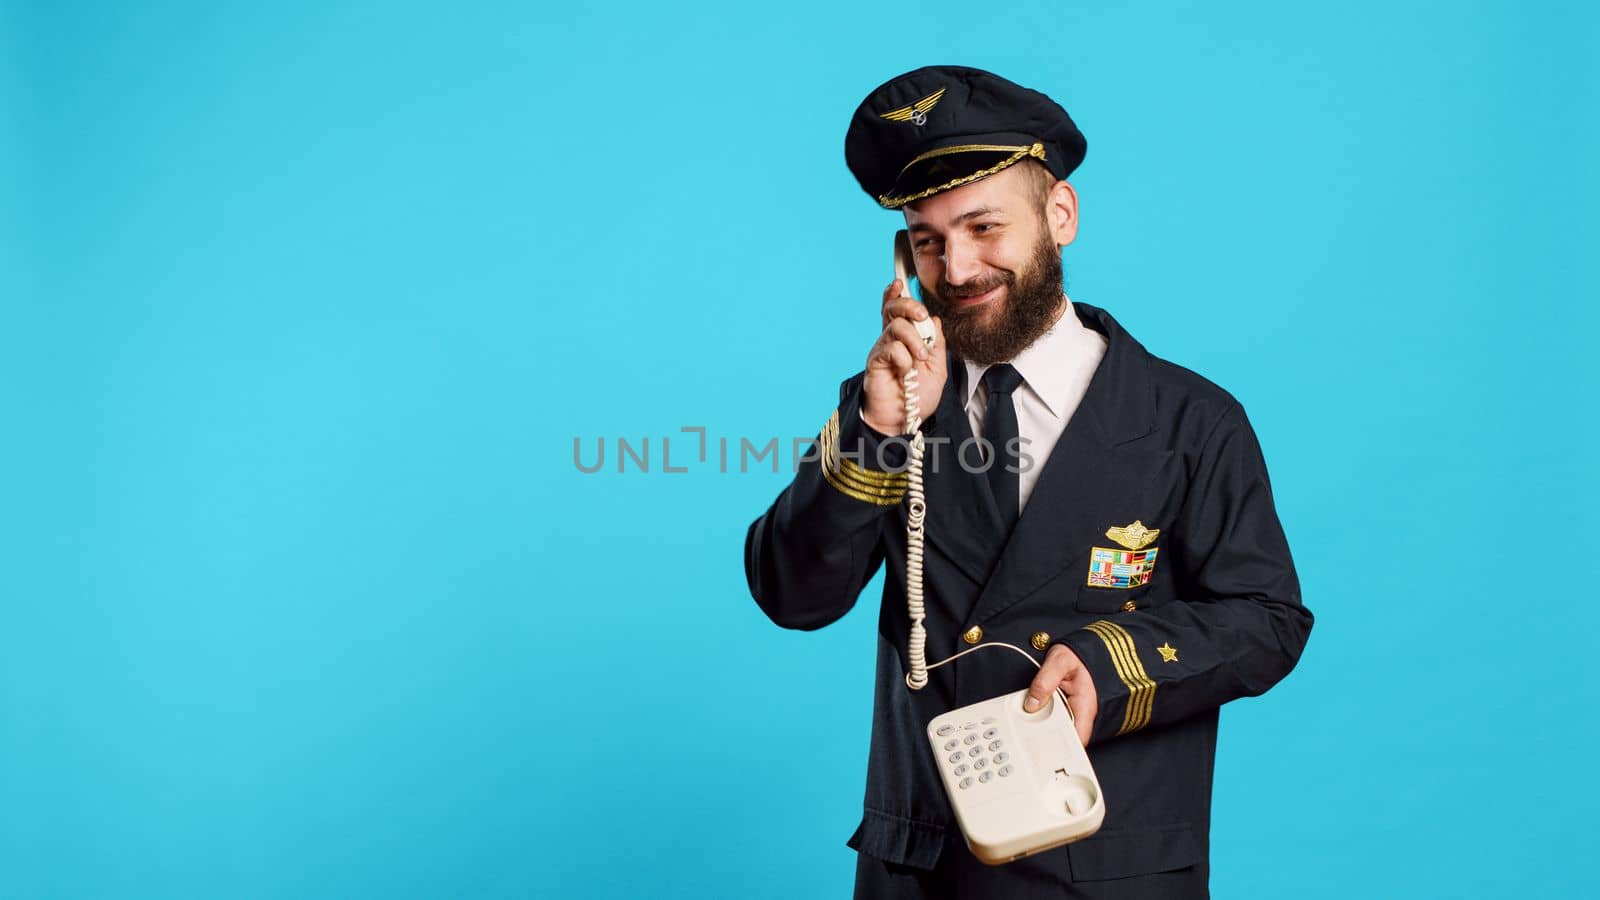 Commercial pilot talking on landline phone call in studio, answering office telephone with cord for remote conversation. Young smiling airliner in uniform chatting on phone line.